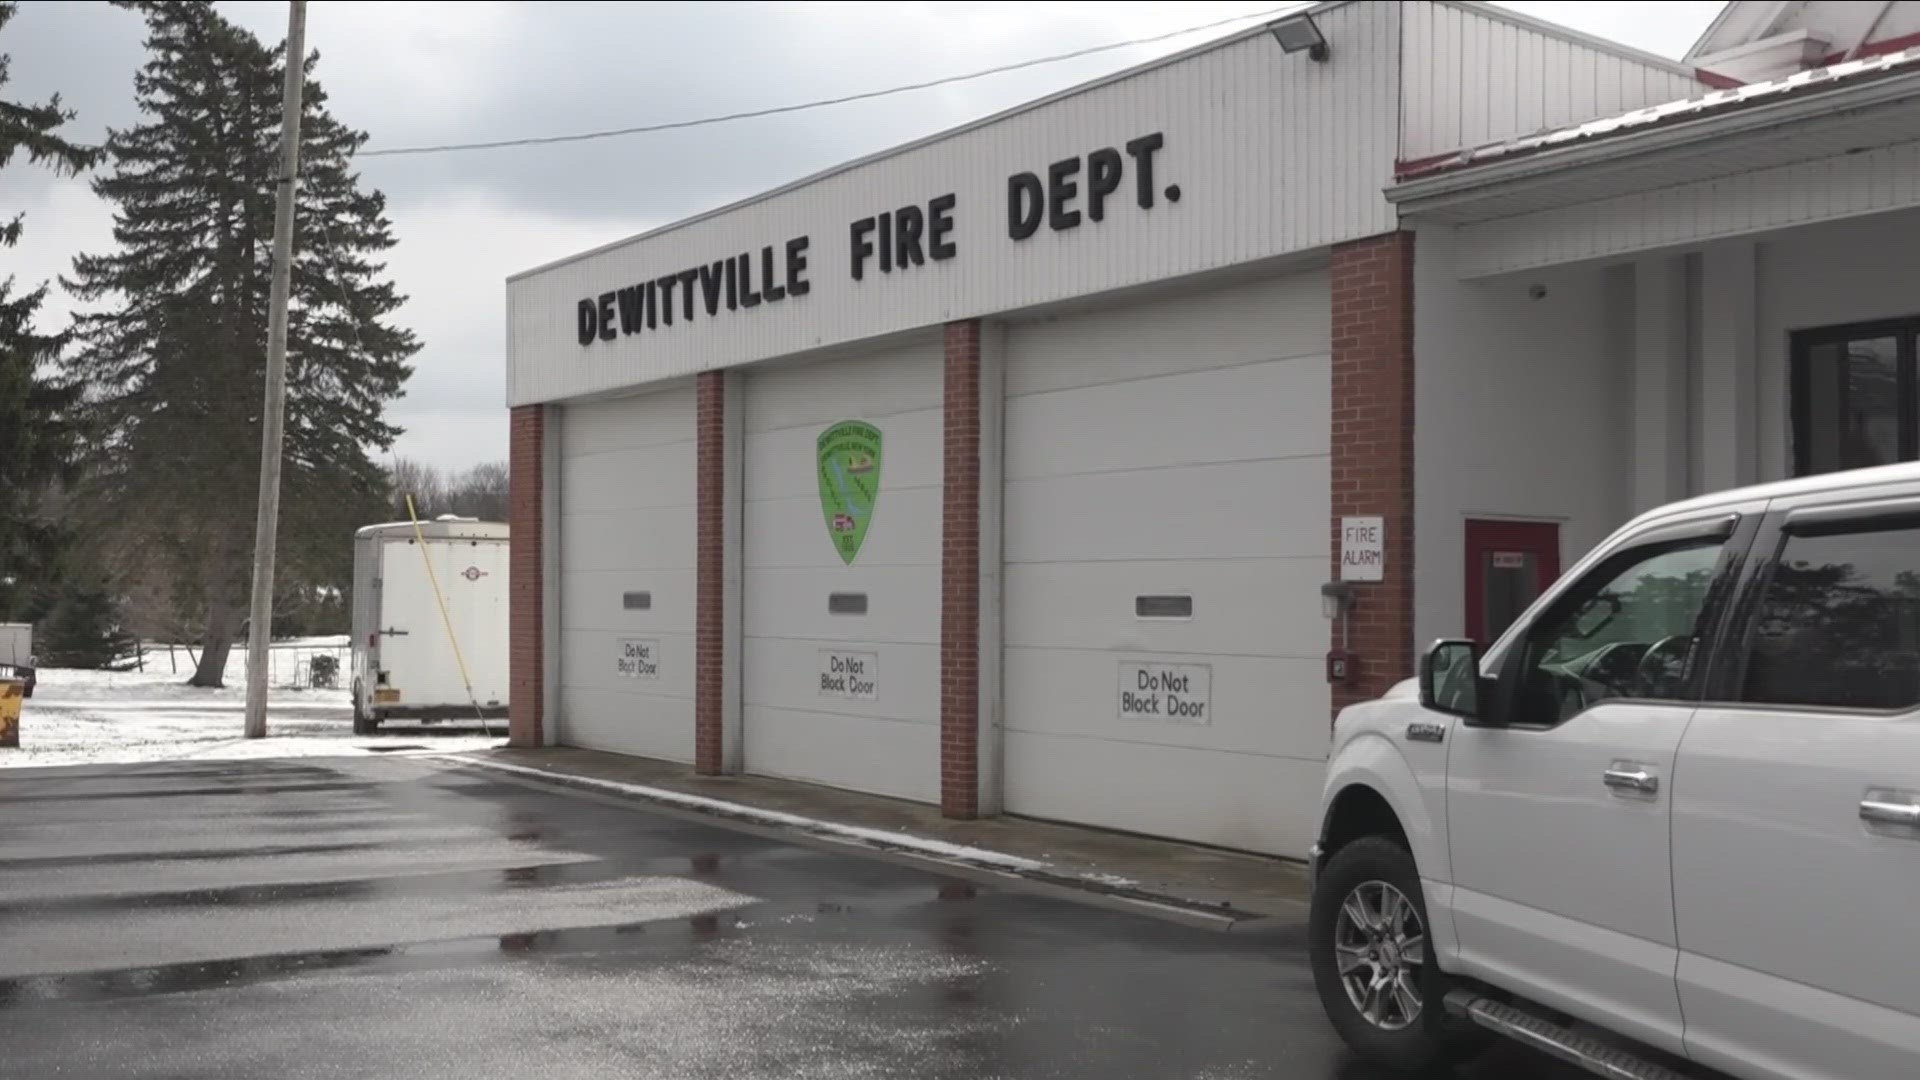 The four departments are expected to meet later this month to discuss the naming of this potentially new fire district.